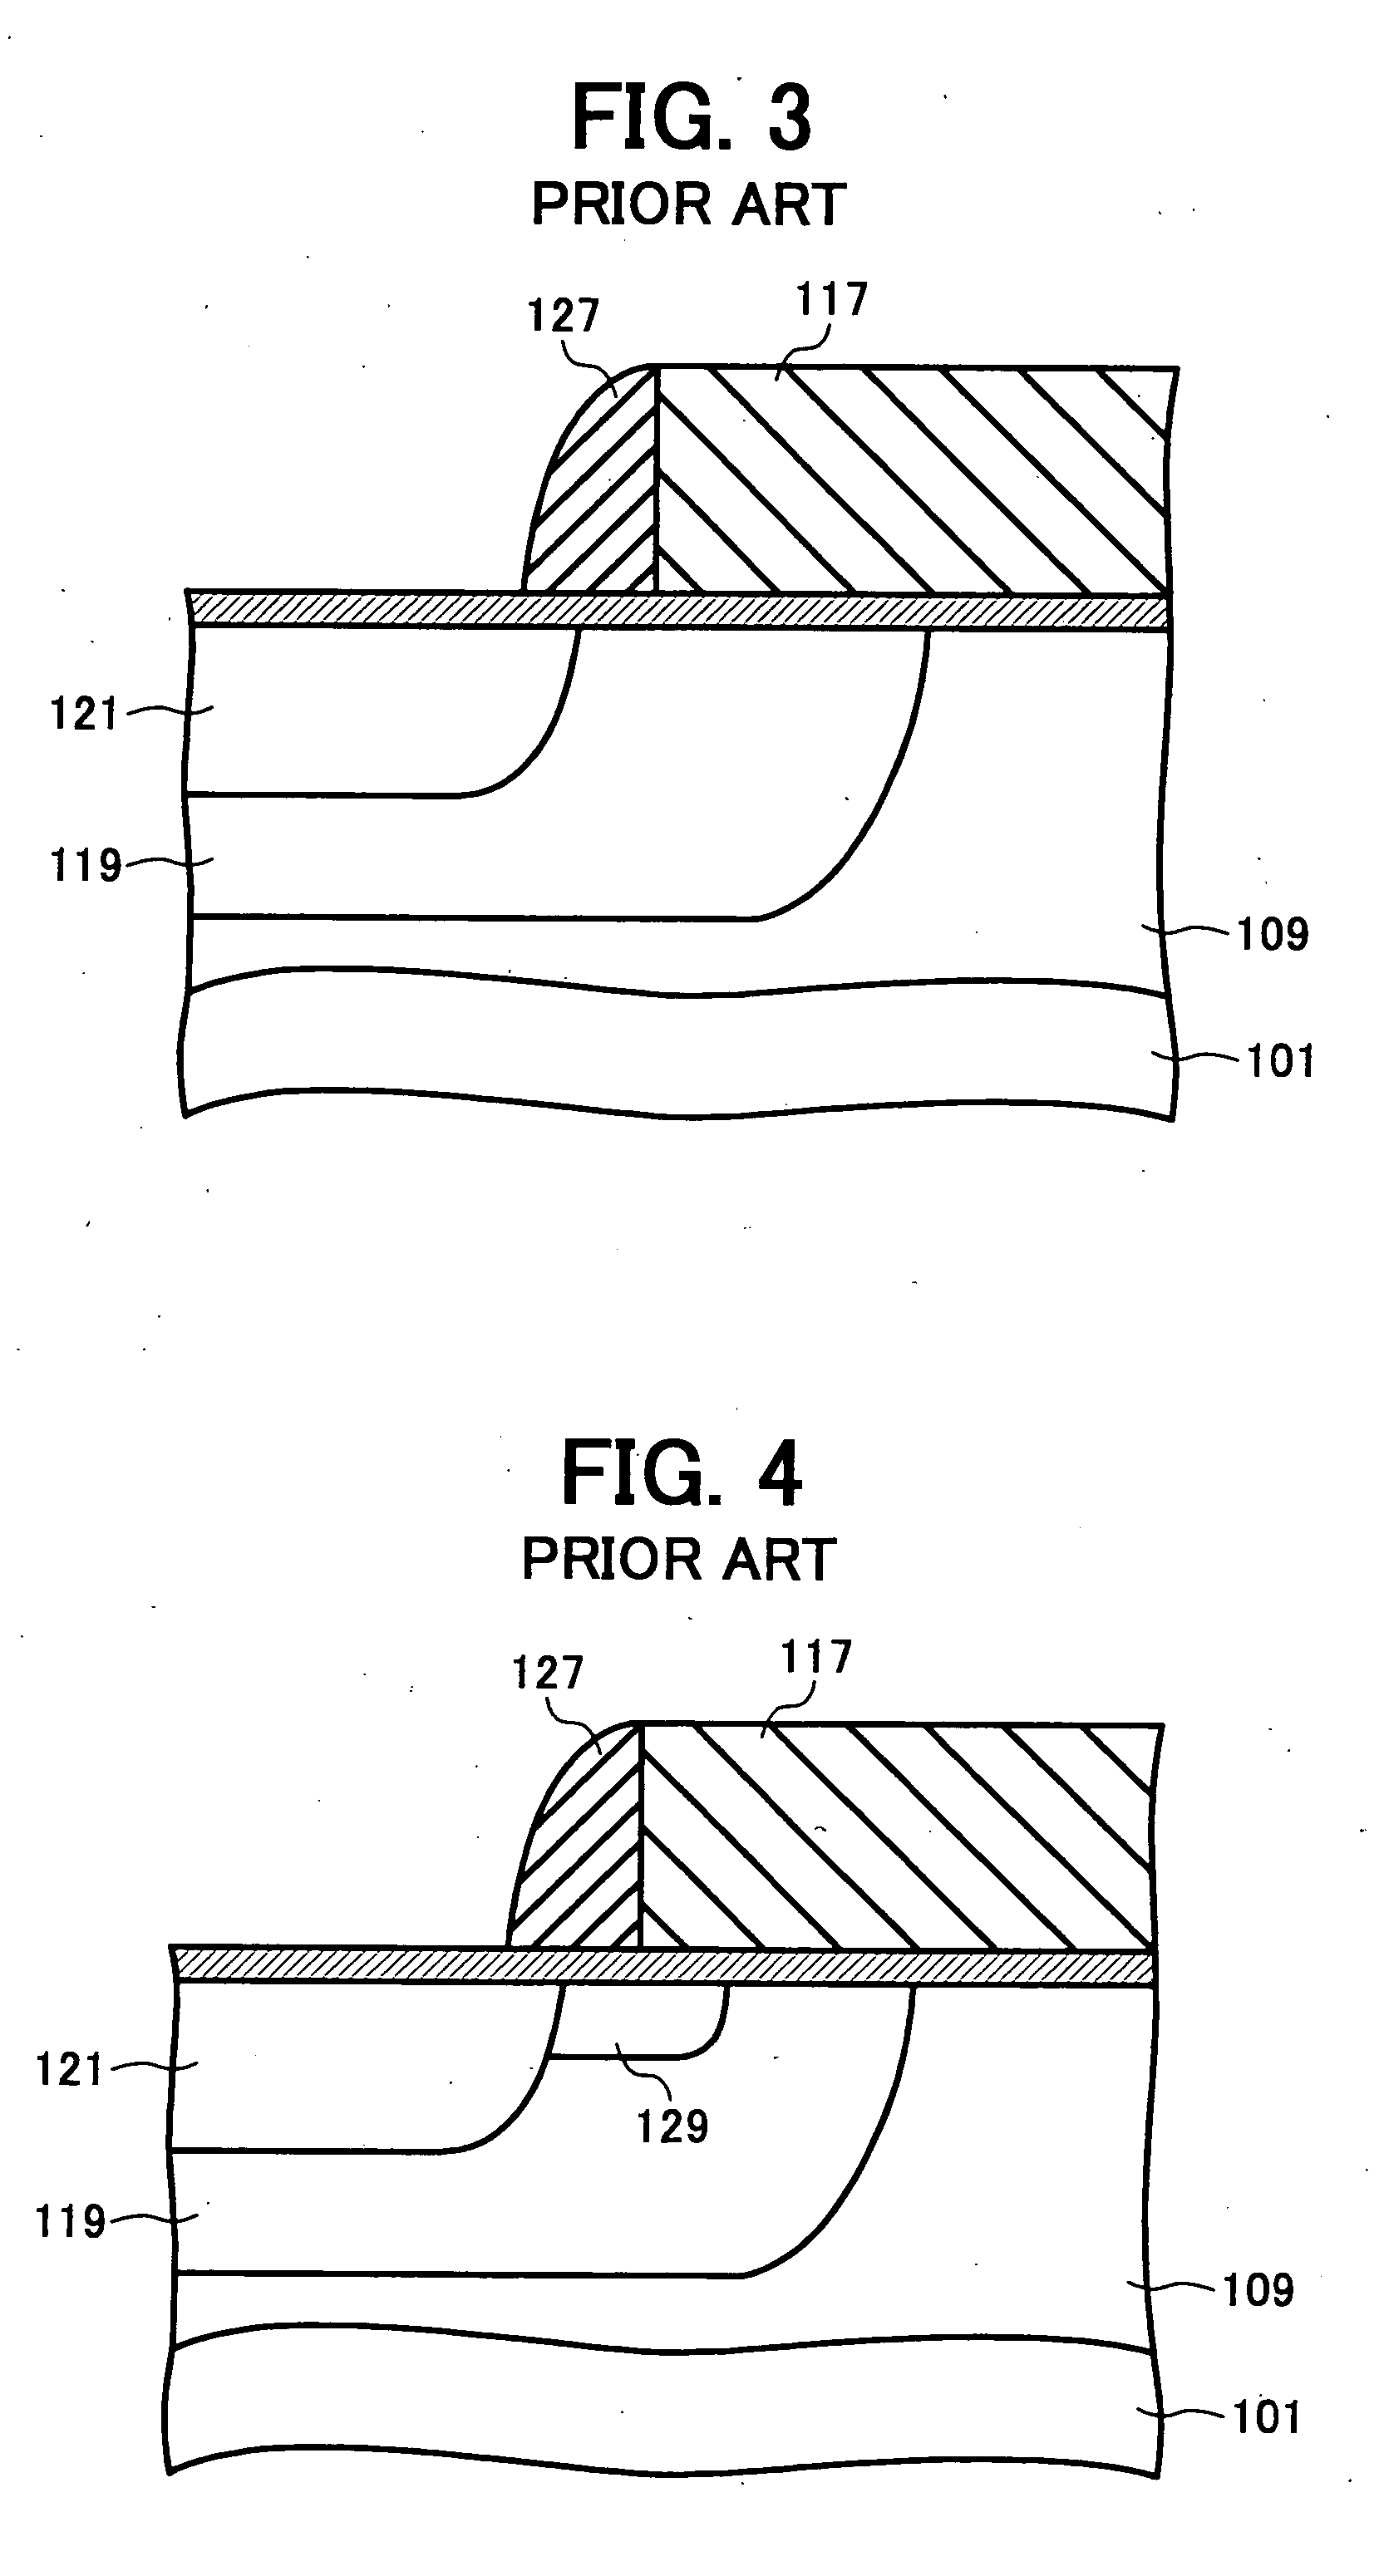 Semiconductor device, method for manufacturing the semiconductor device, and integrated circuit including the semiconductor device